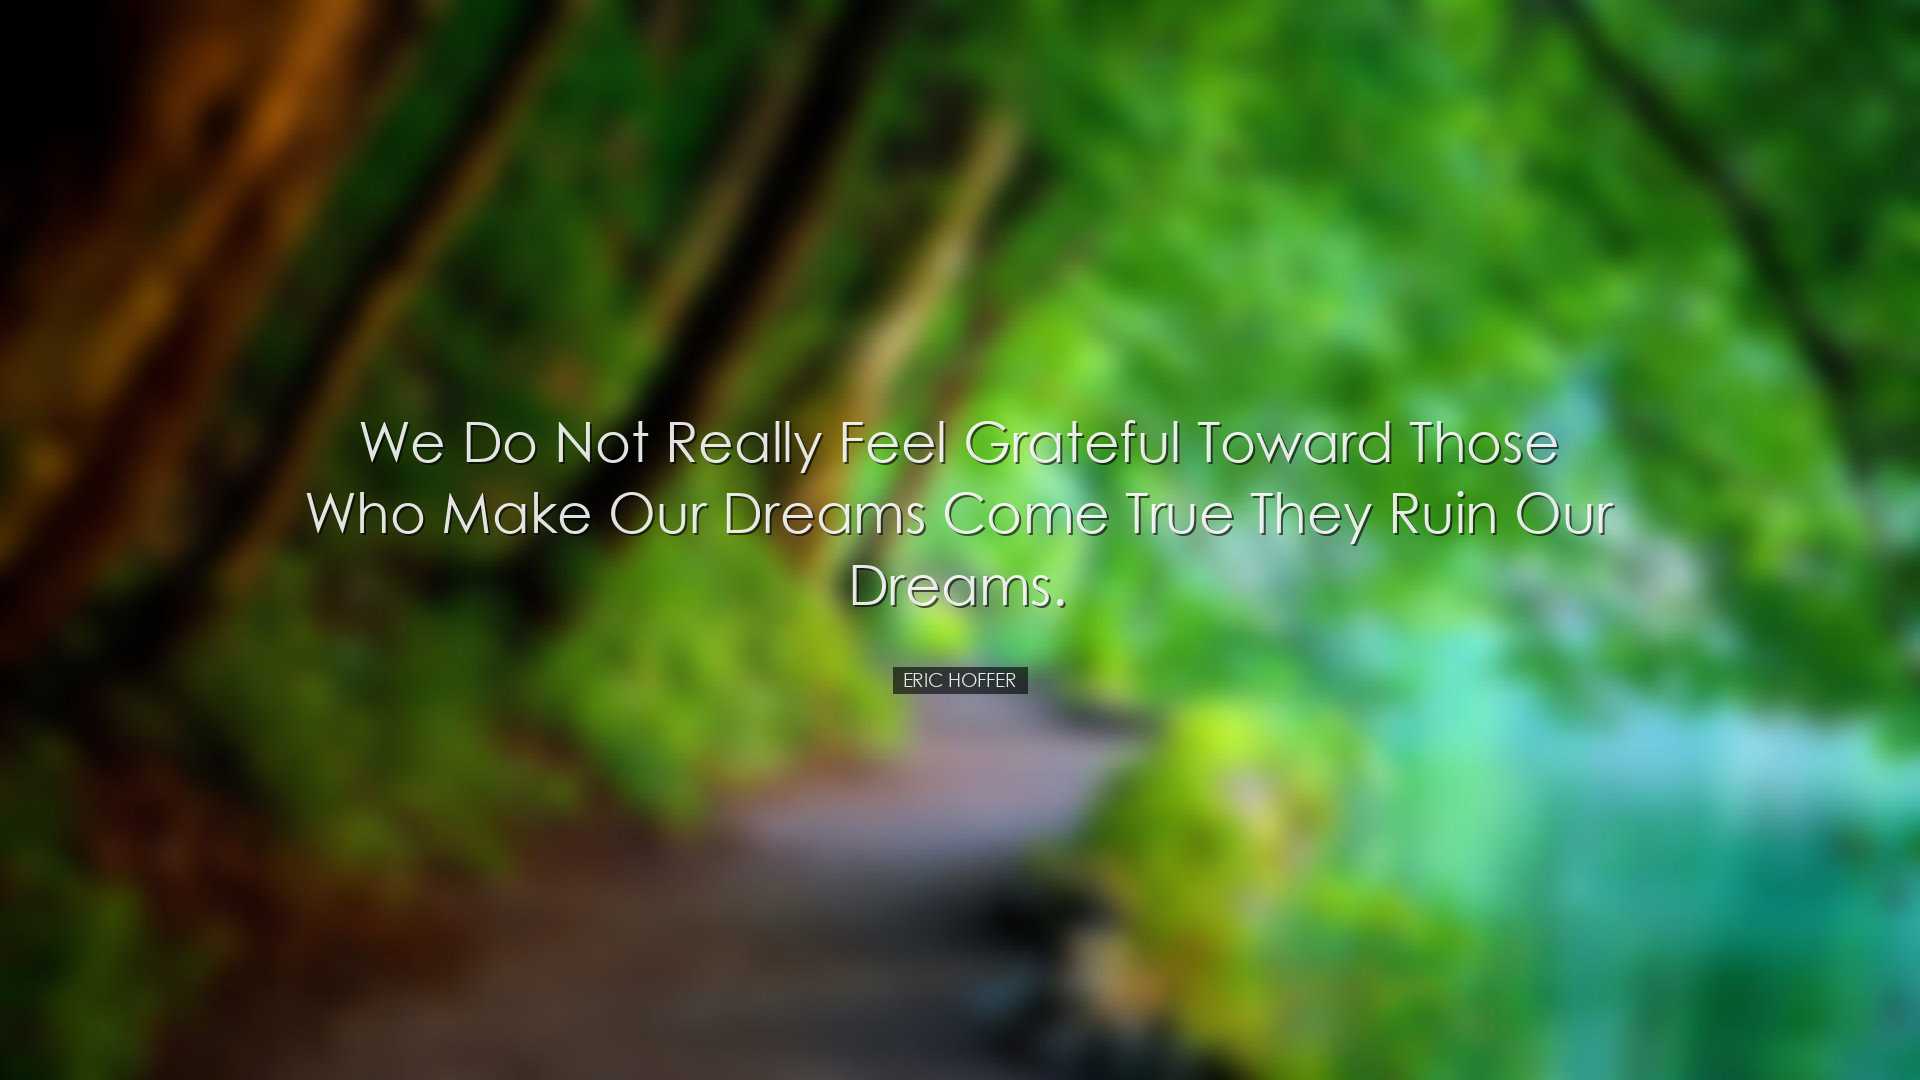 We do not really feel grateful toward those who make our dreams co